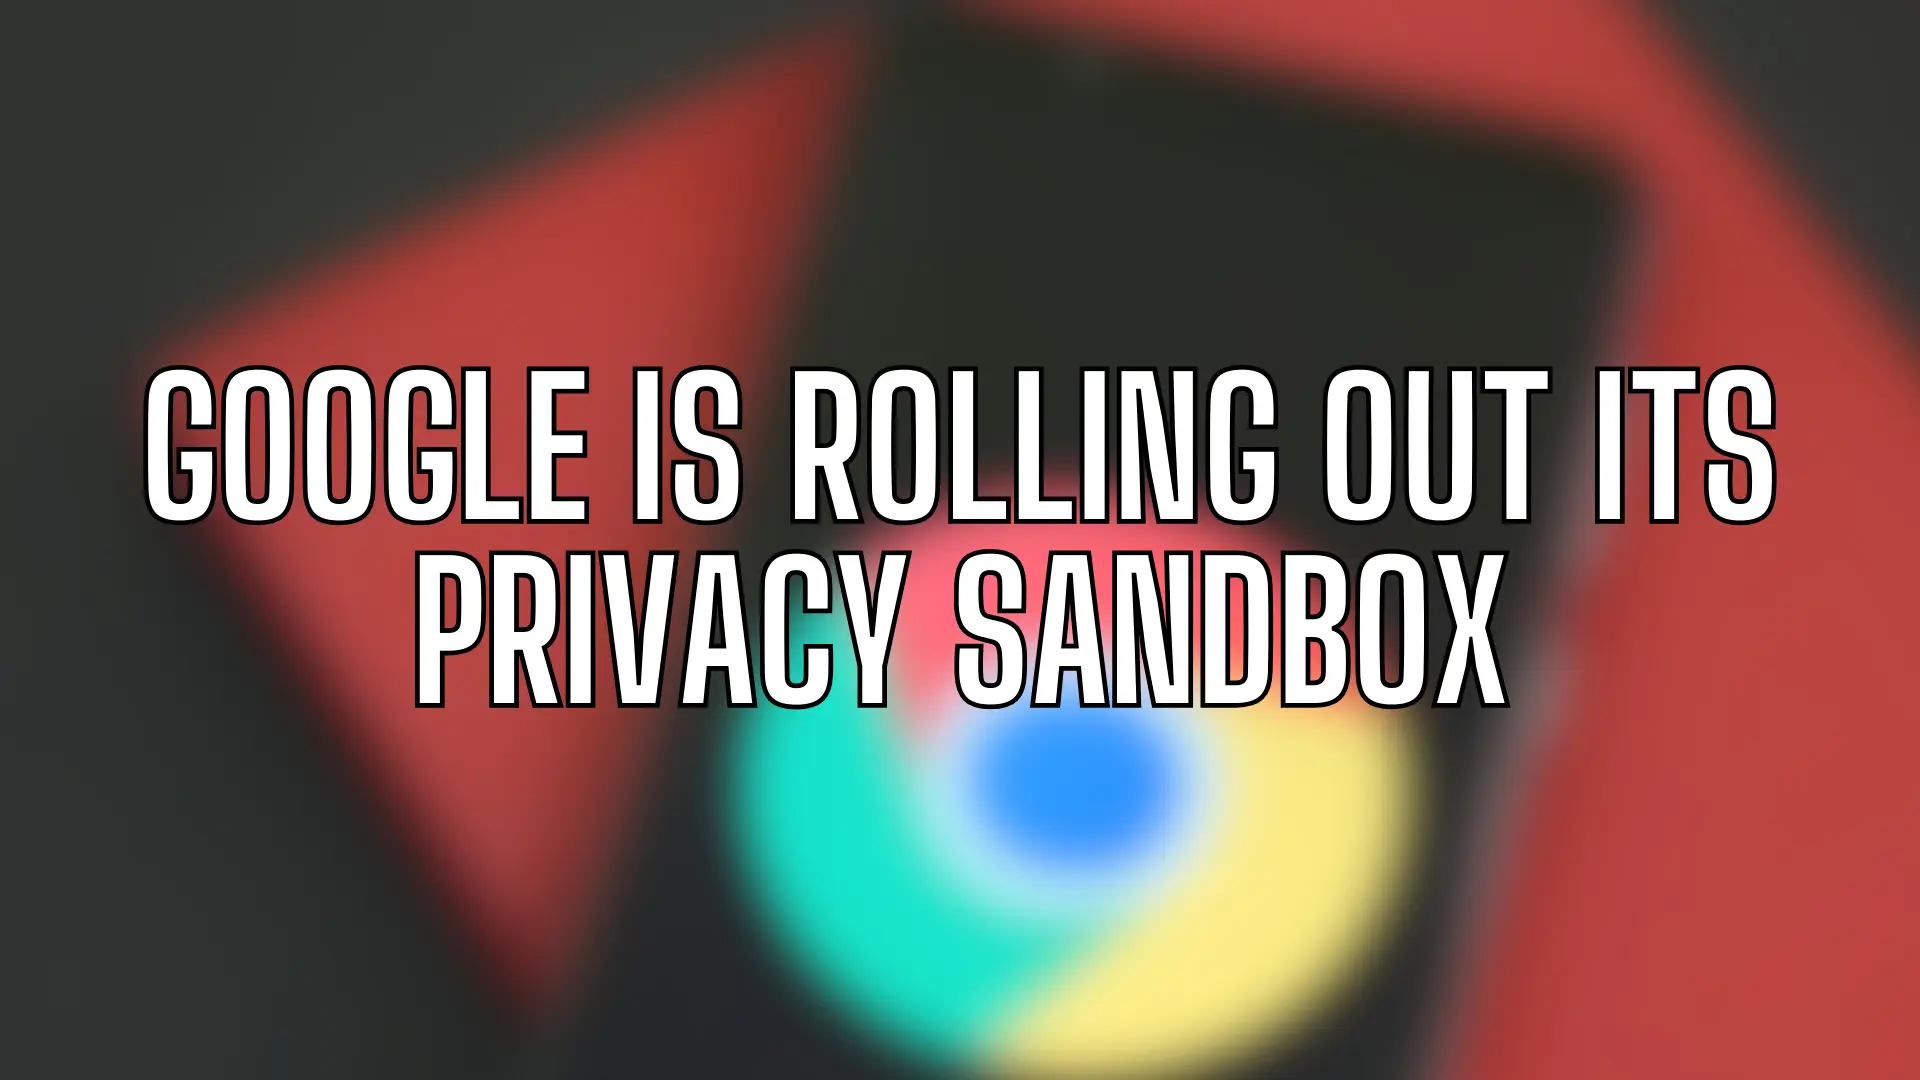 Google is Rolling Out Its Privacy Sandbox